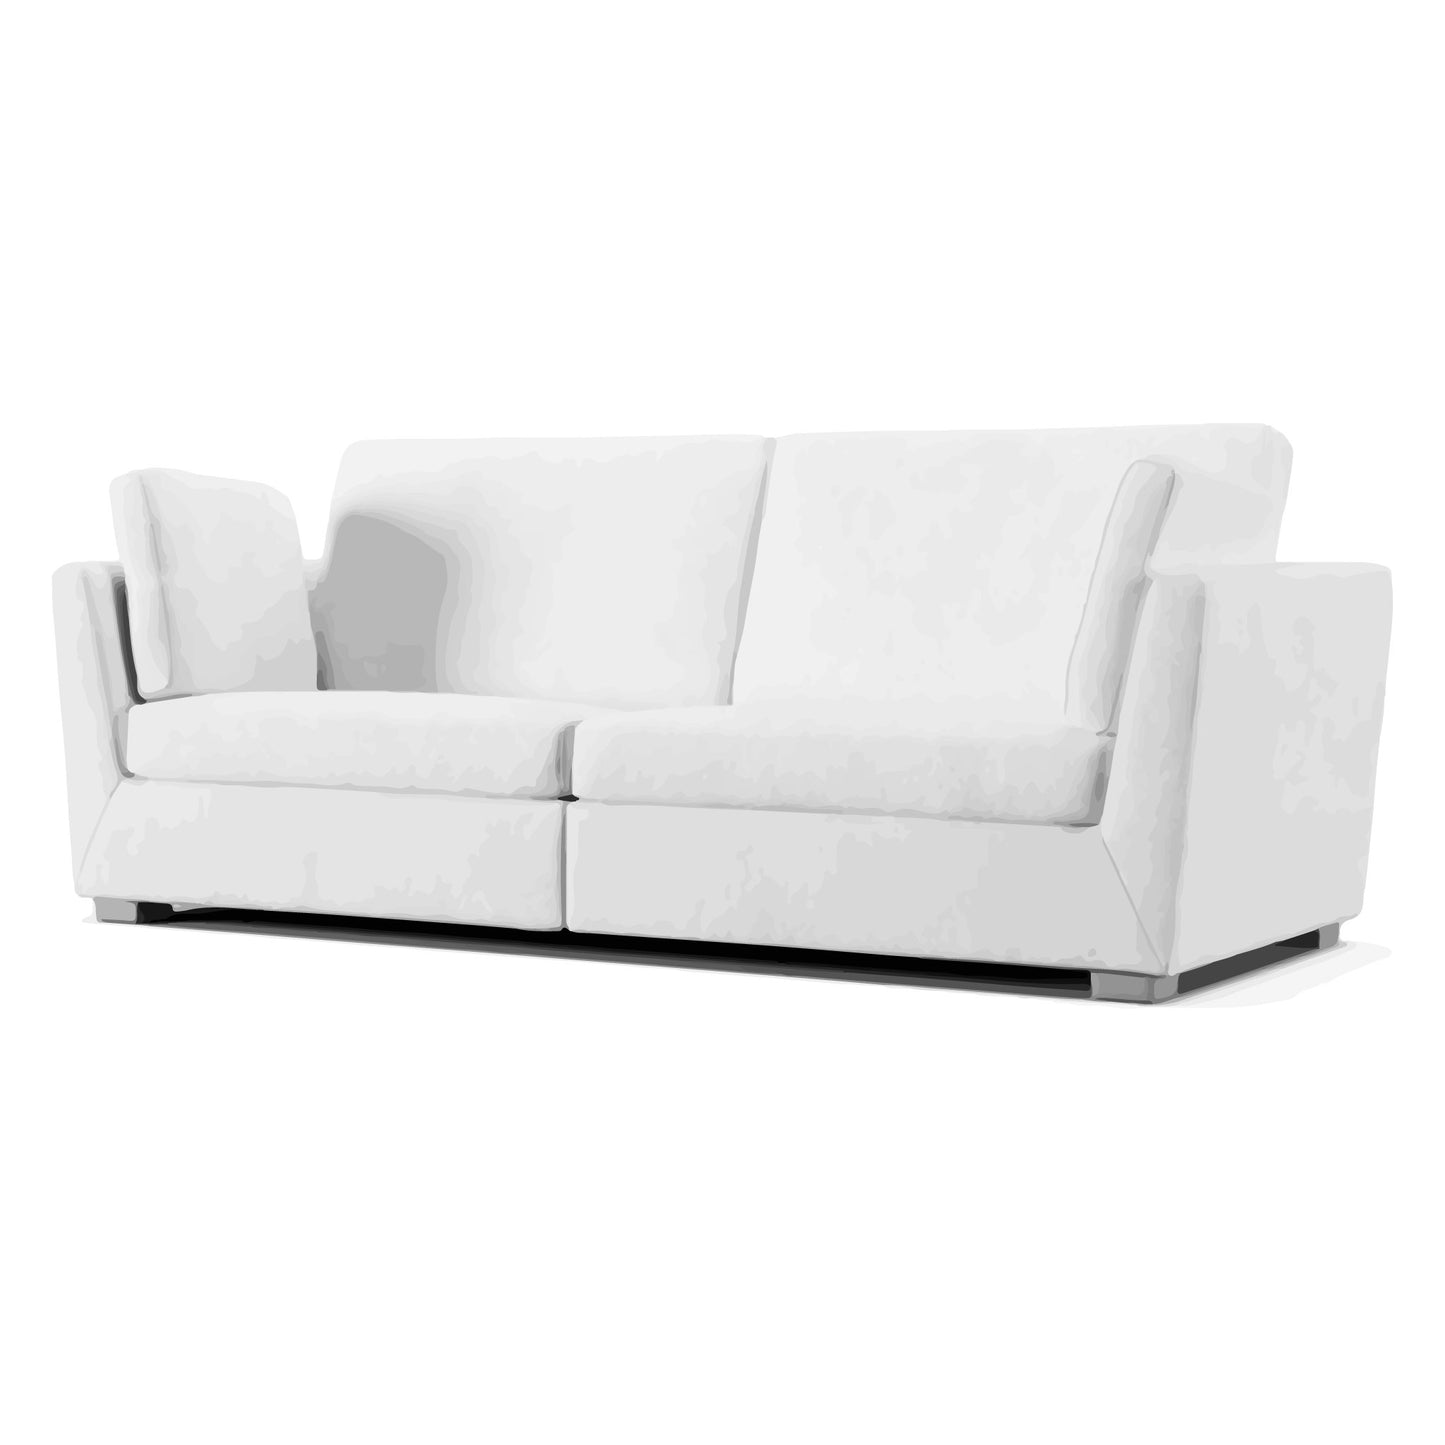 Stockholm 3.5 Seater Sofa Cover